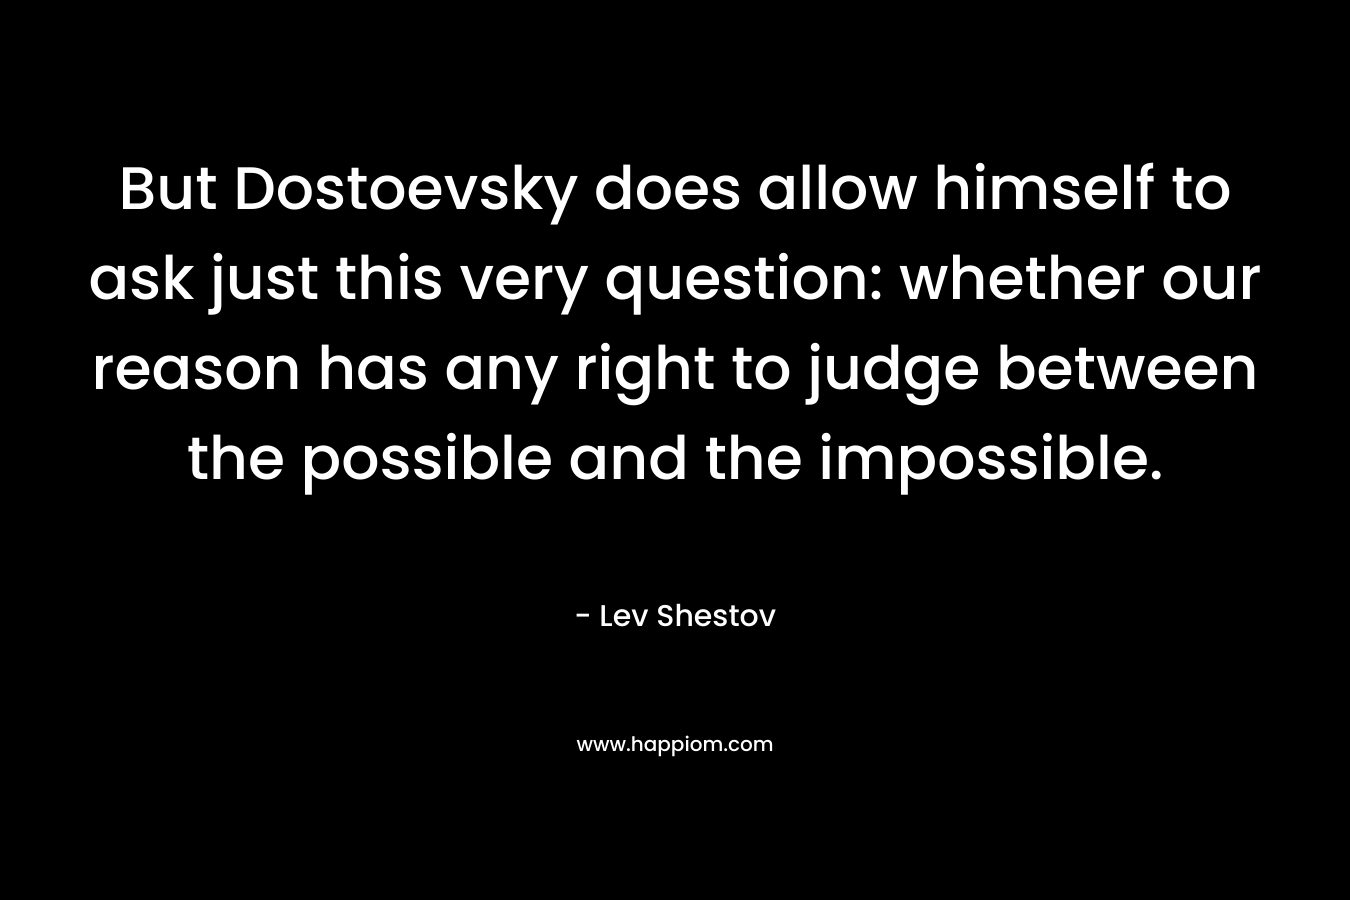 But Dostoevsky does allow himself to ask just this very question: whether our reason has any right to judge between the possible and the impossible.